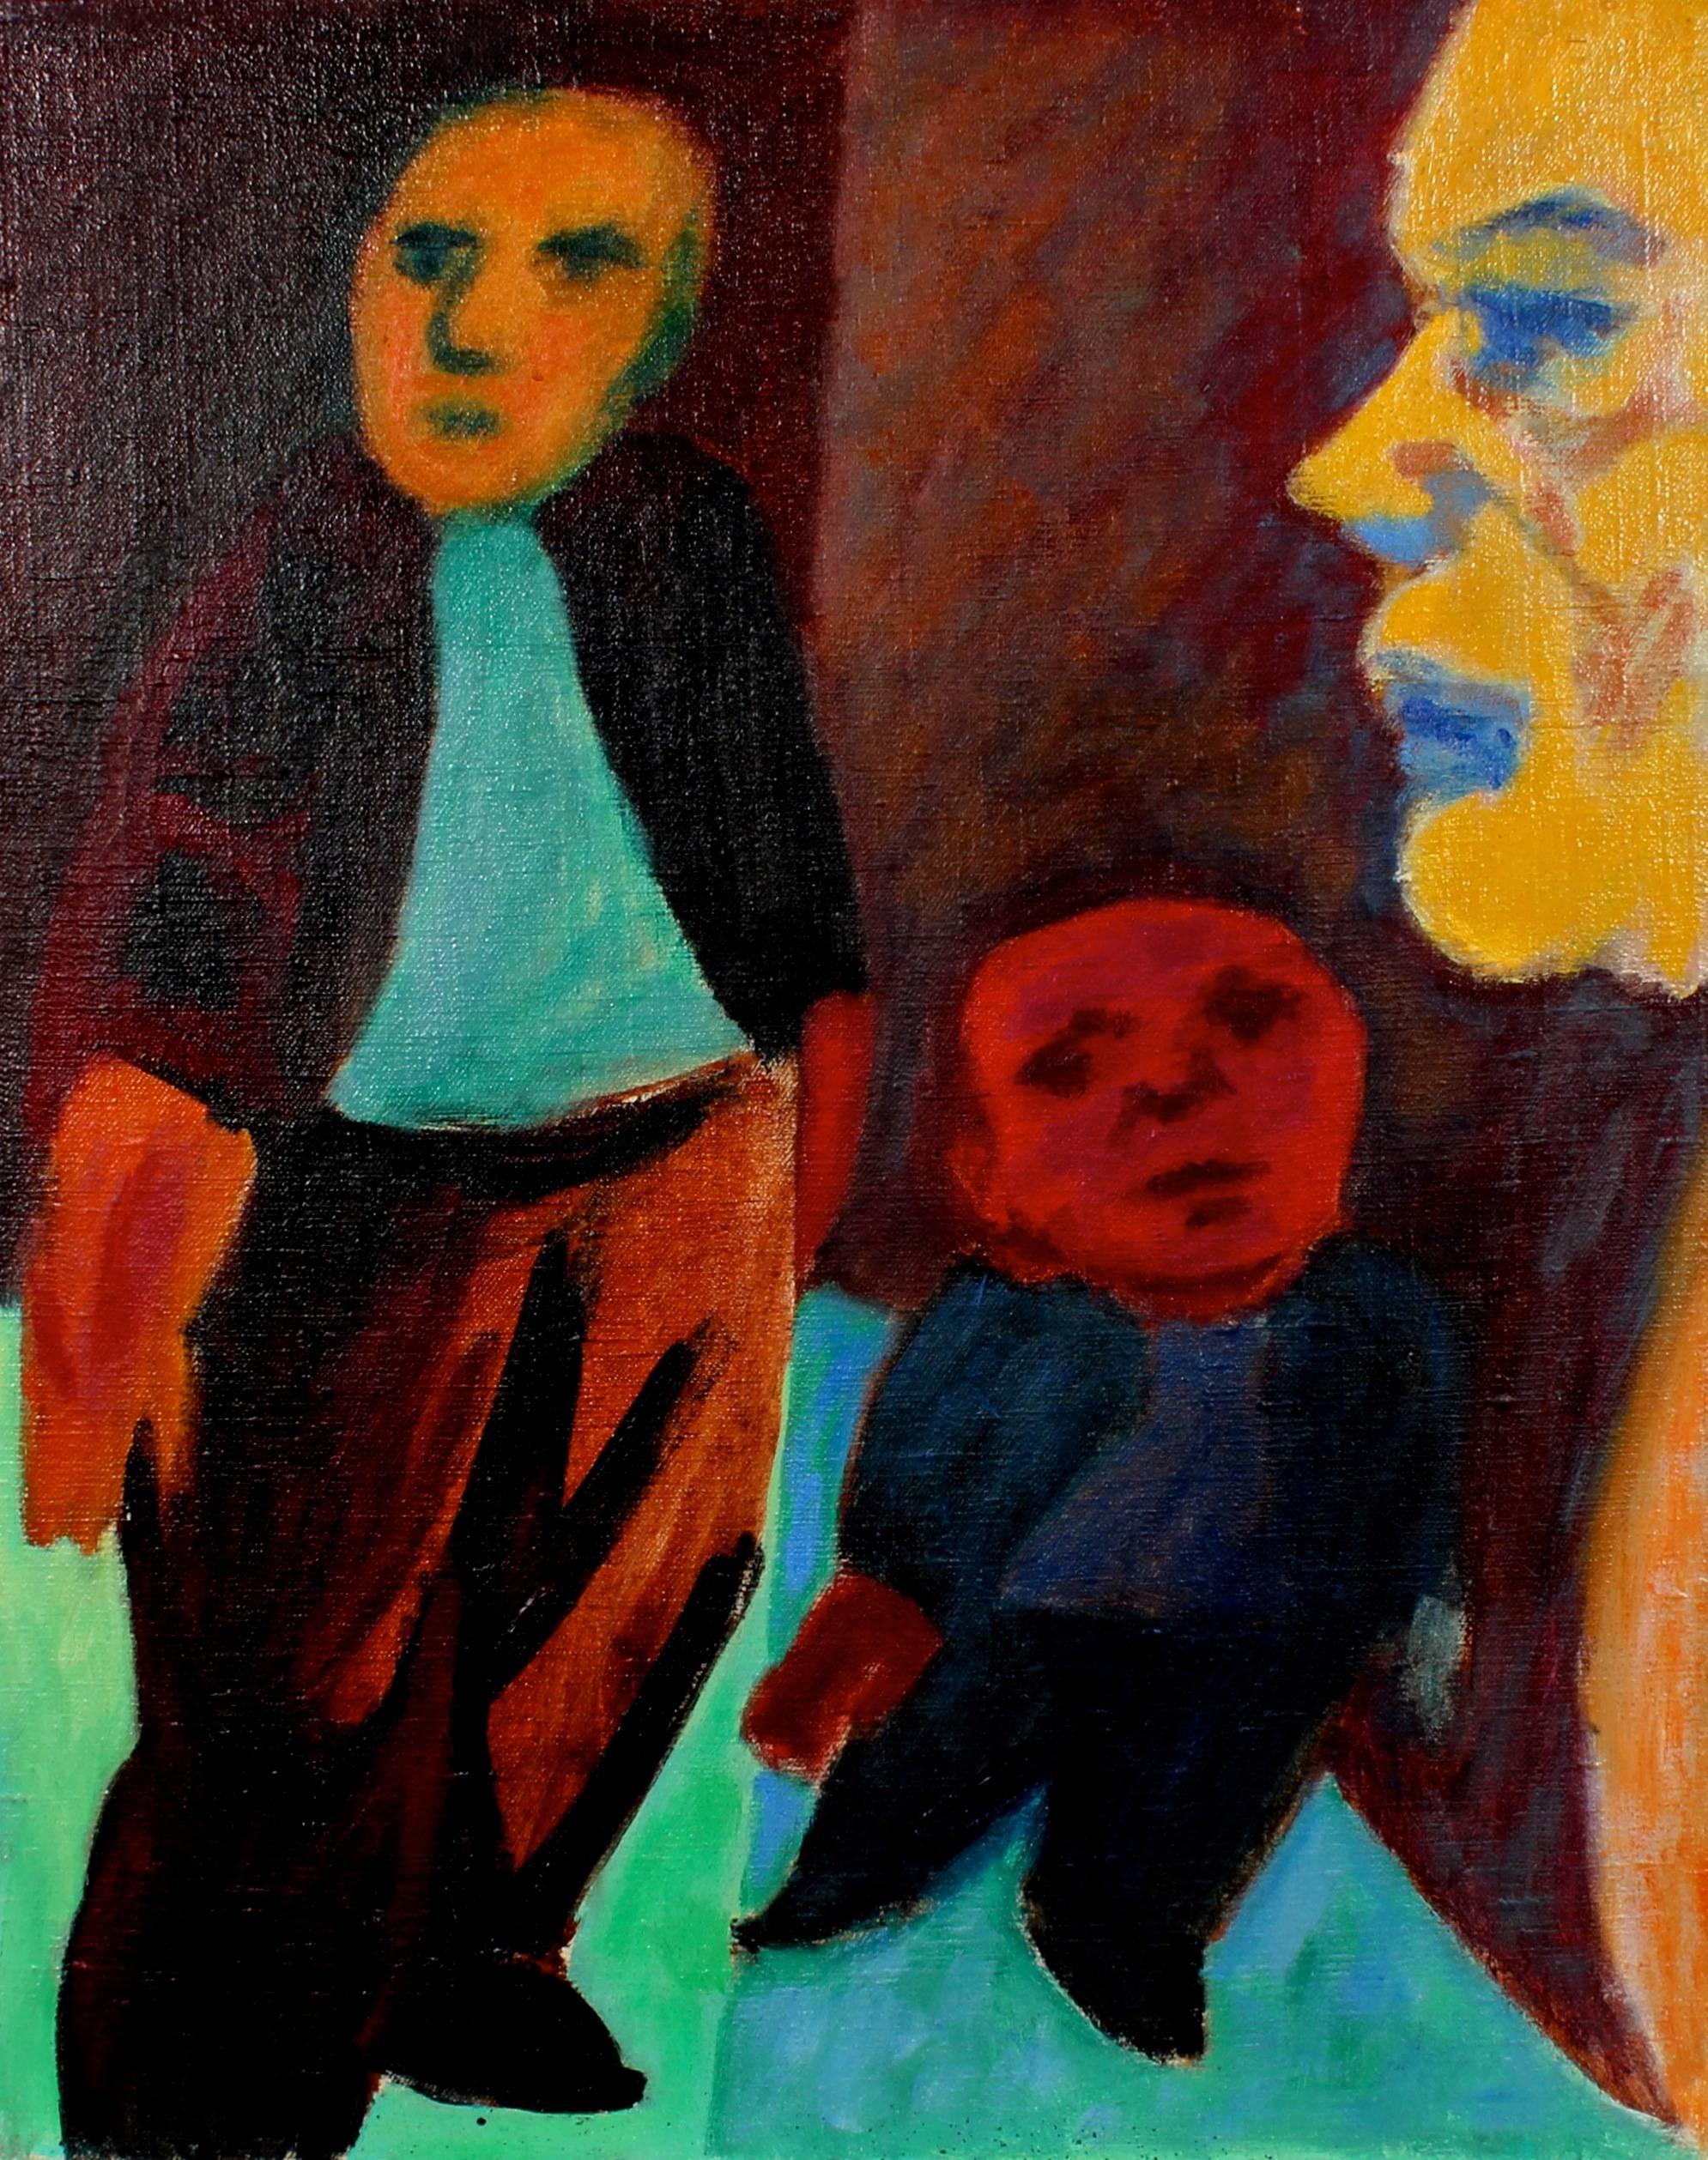 Martin Snipper Figurative Painting - Expressionist Figures, Oil on Canvas, Circa 1940s